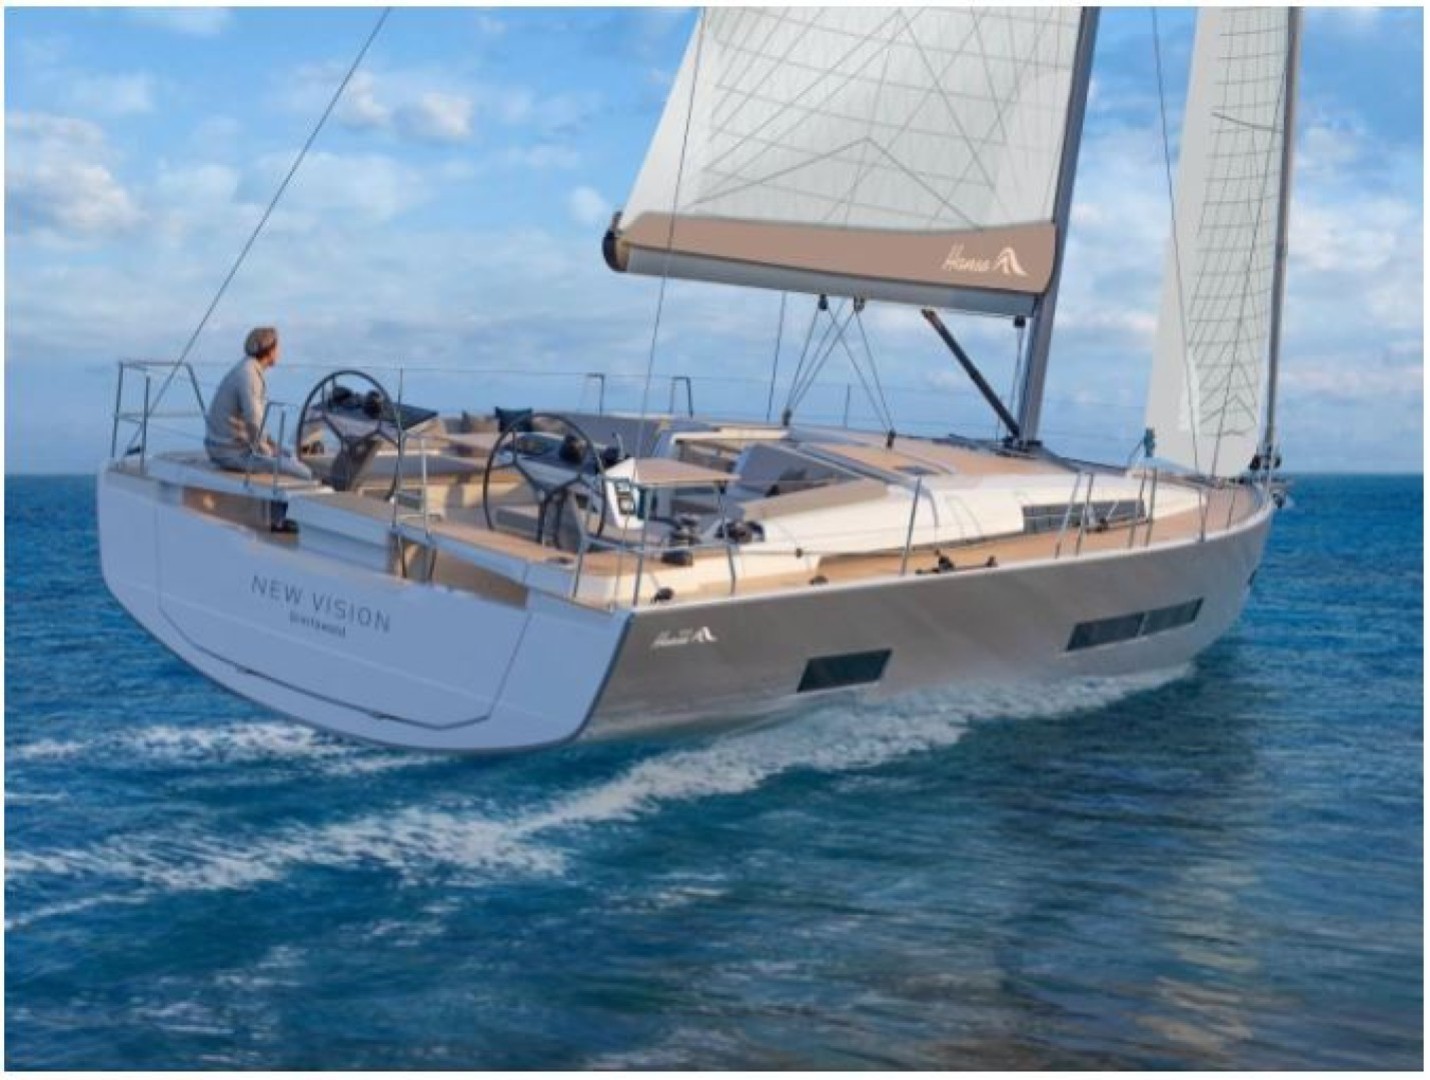 HanseYachts business results 2021/22 published